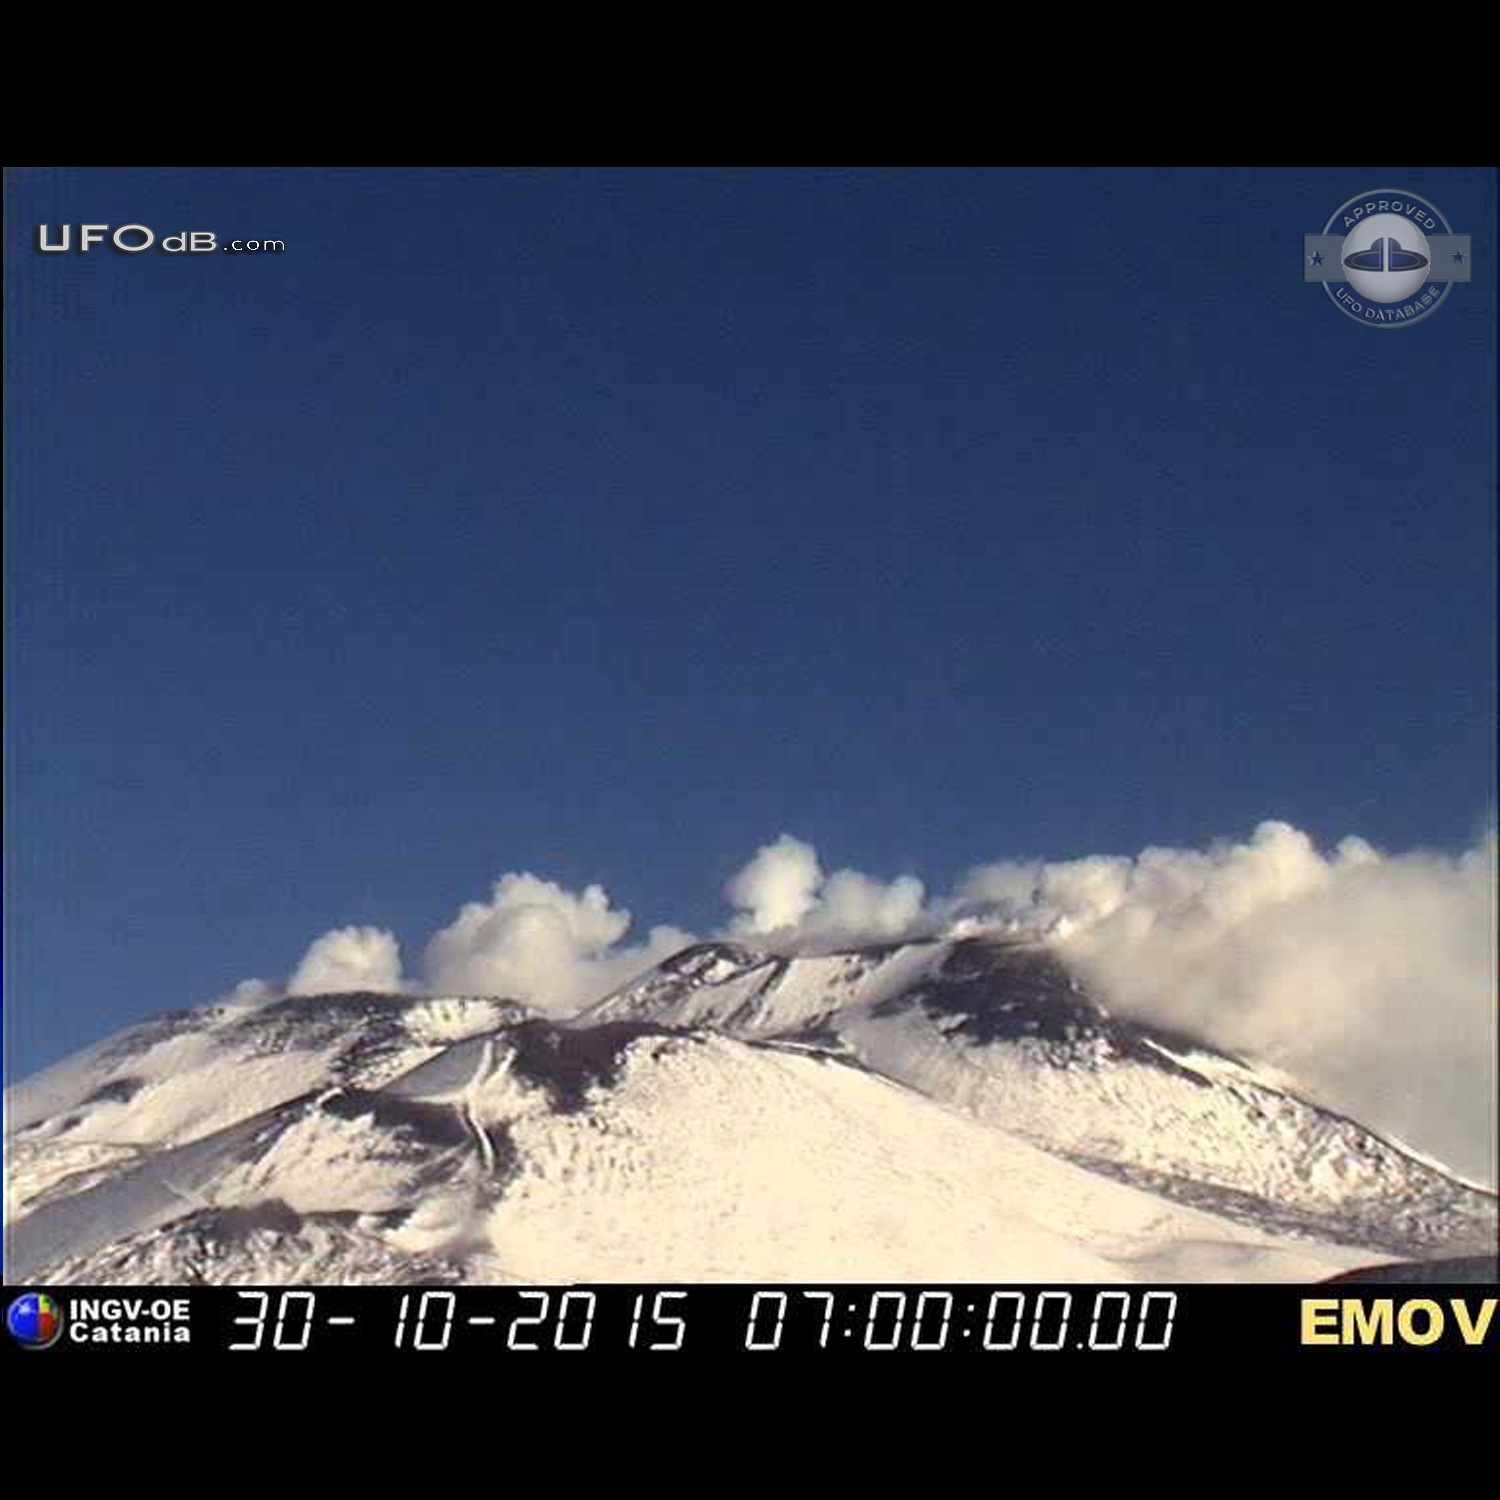 UFO seen over peak of Etna volcano in Sicily for some 15 minutes Catan UFO Picture #750-5